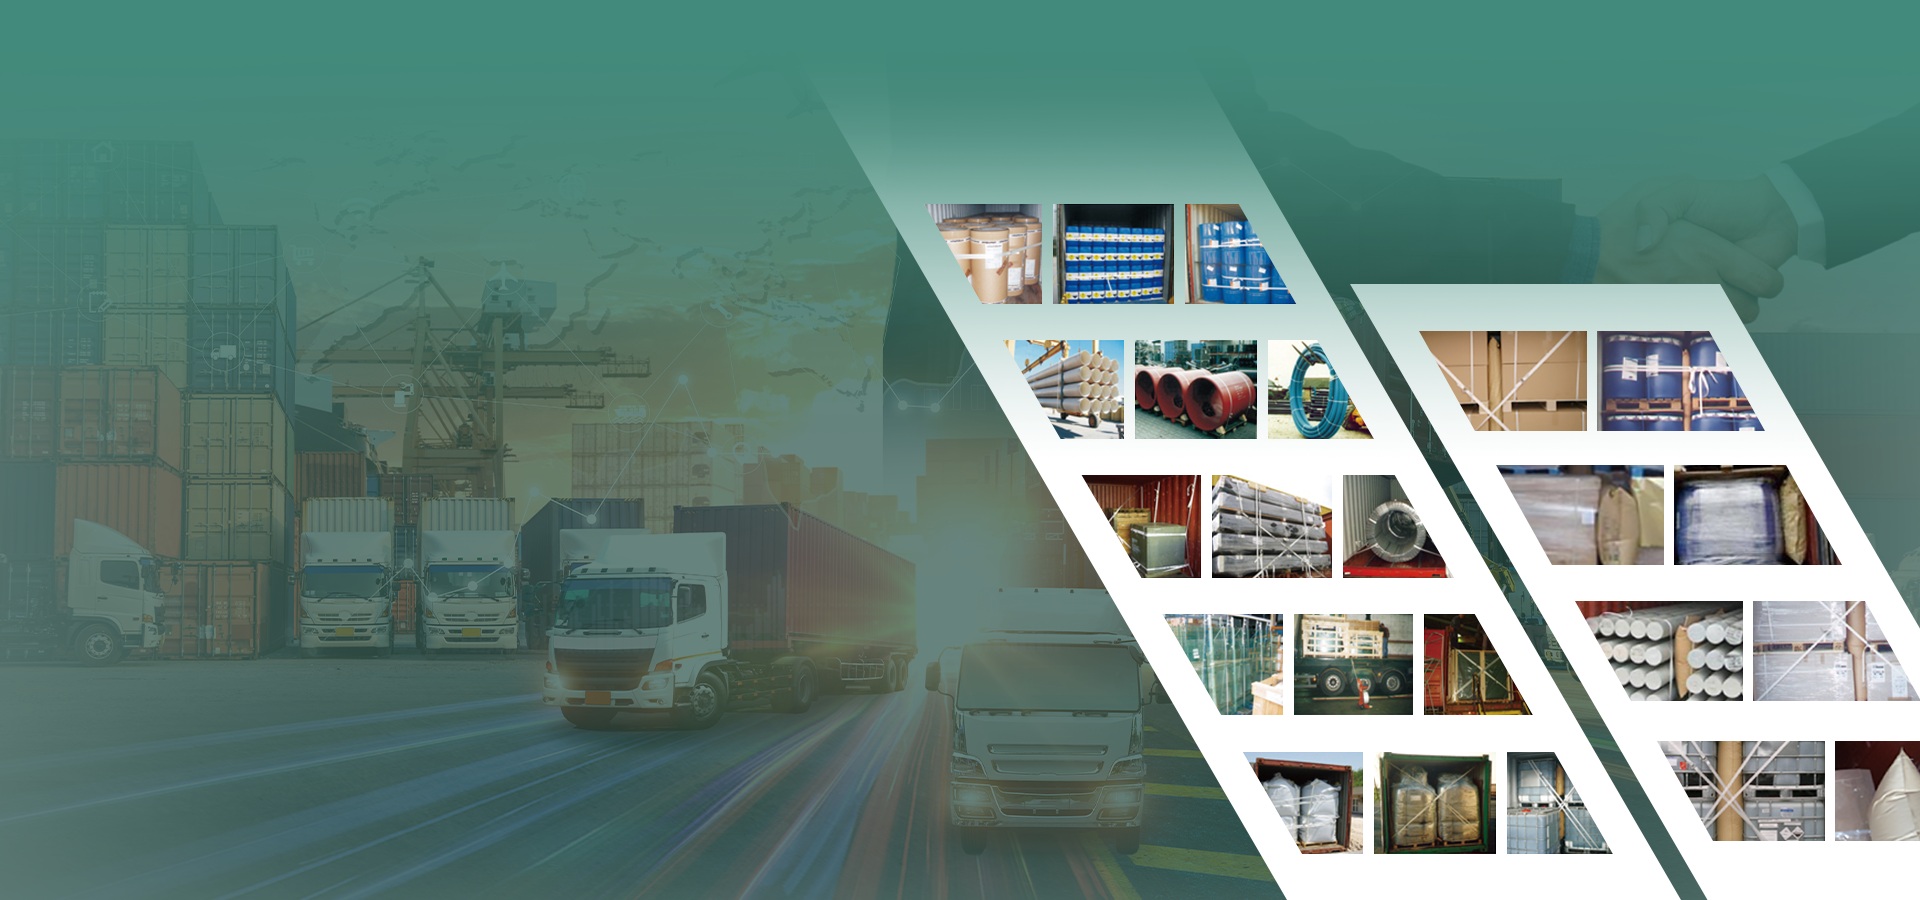 Optimize The Product Transportation Process Plan For You - Safer And More Convenient